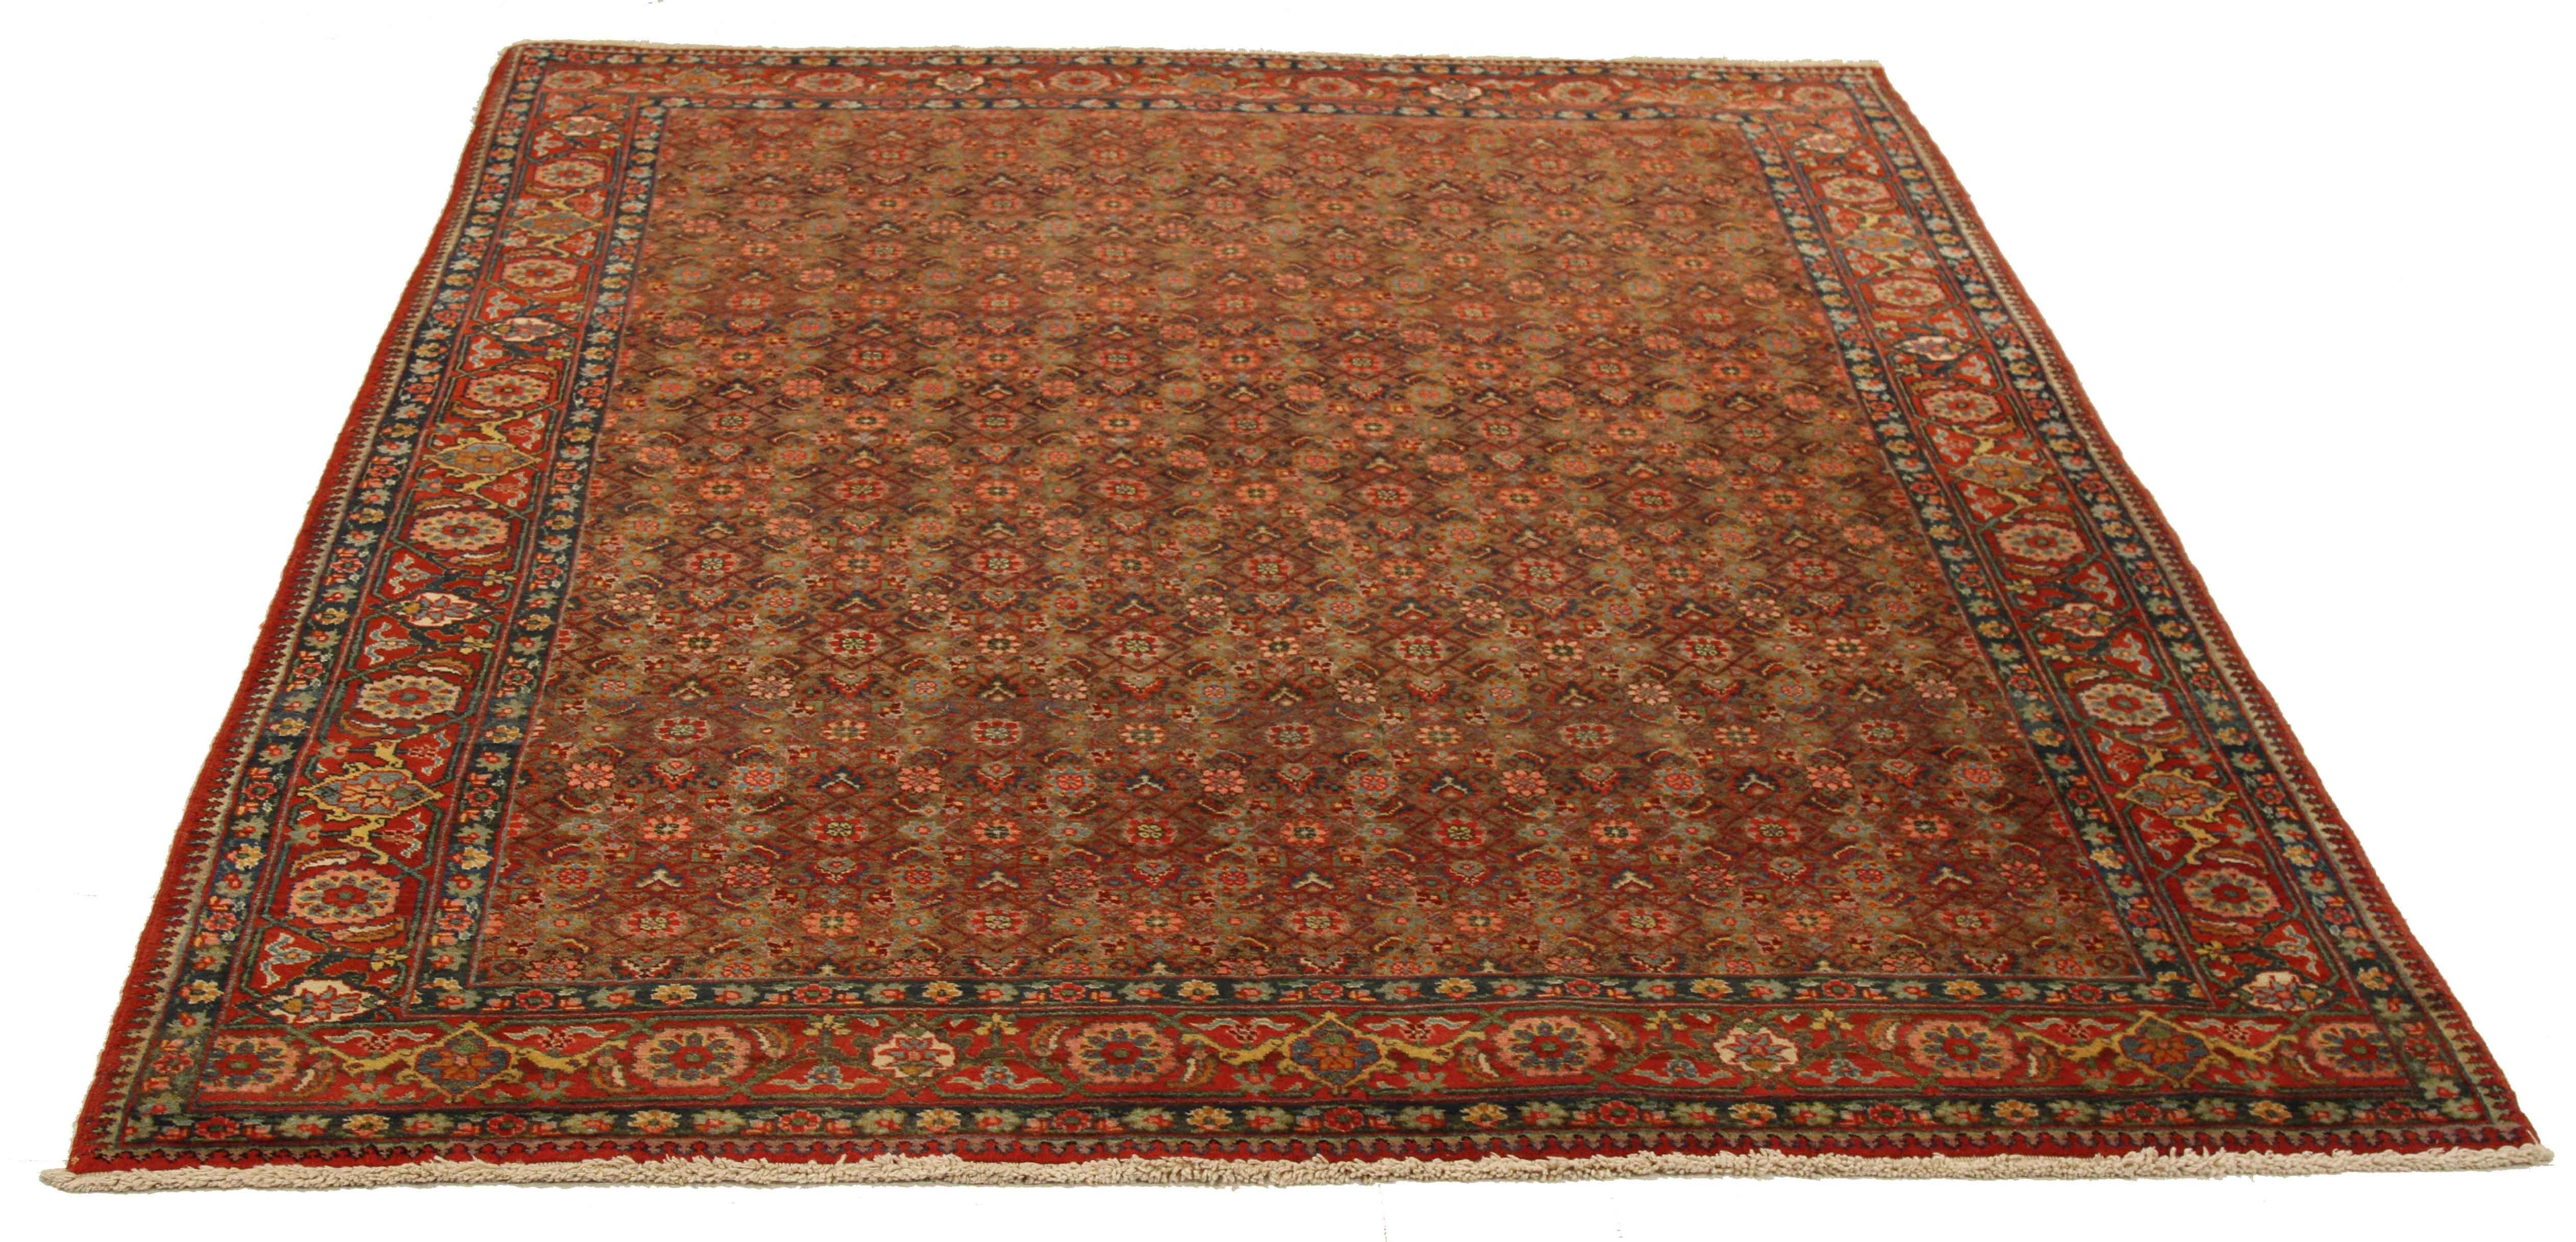 Hand-Woven Antique Persian Tabriz Rug with Red and Green Flower Allover Motifs For Sale